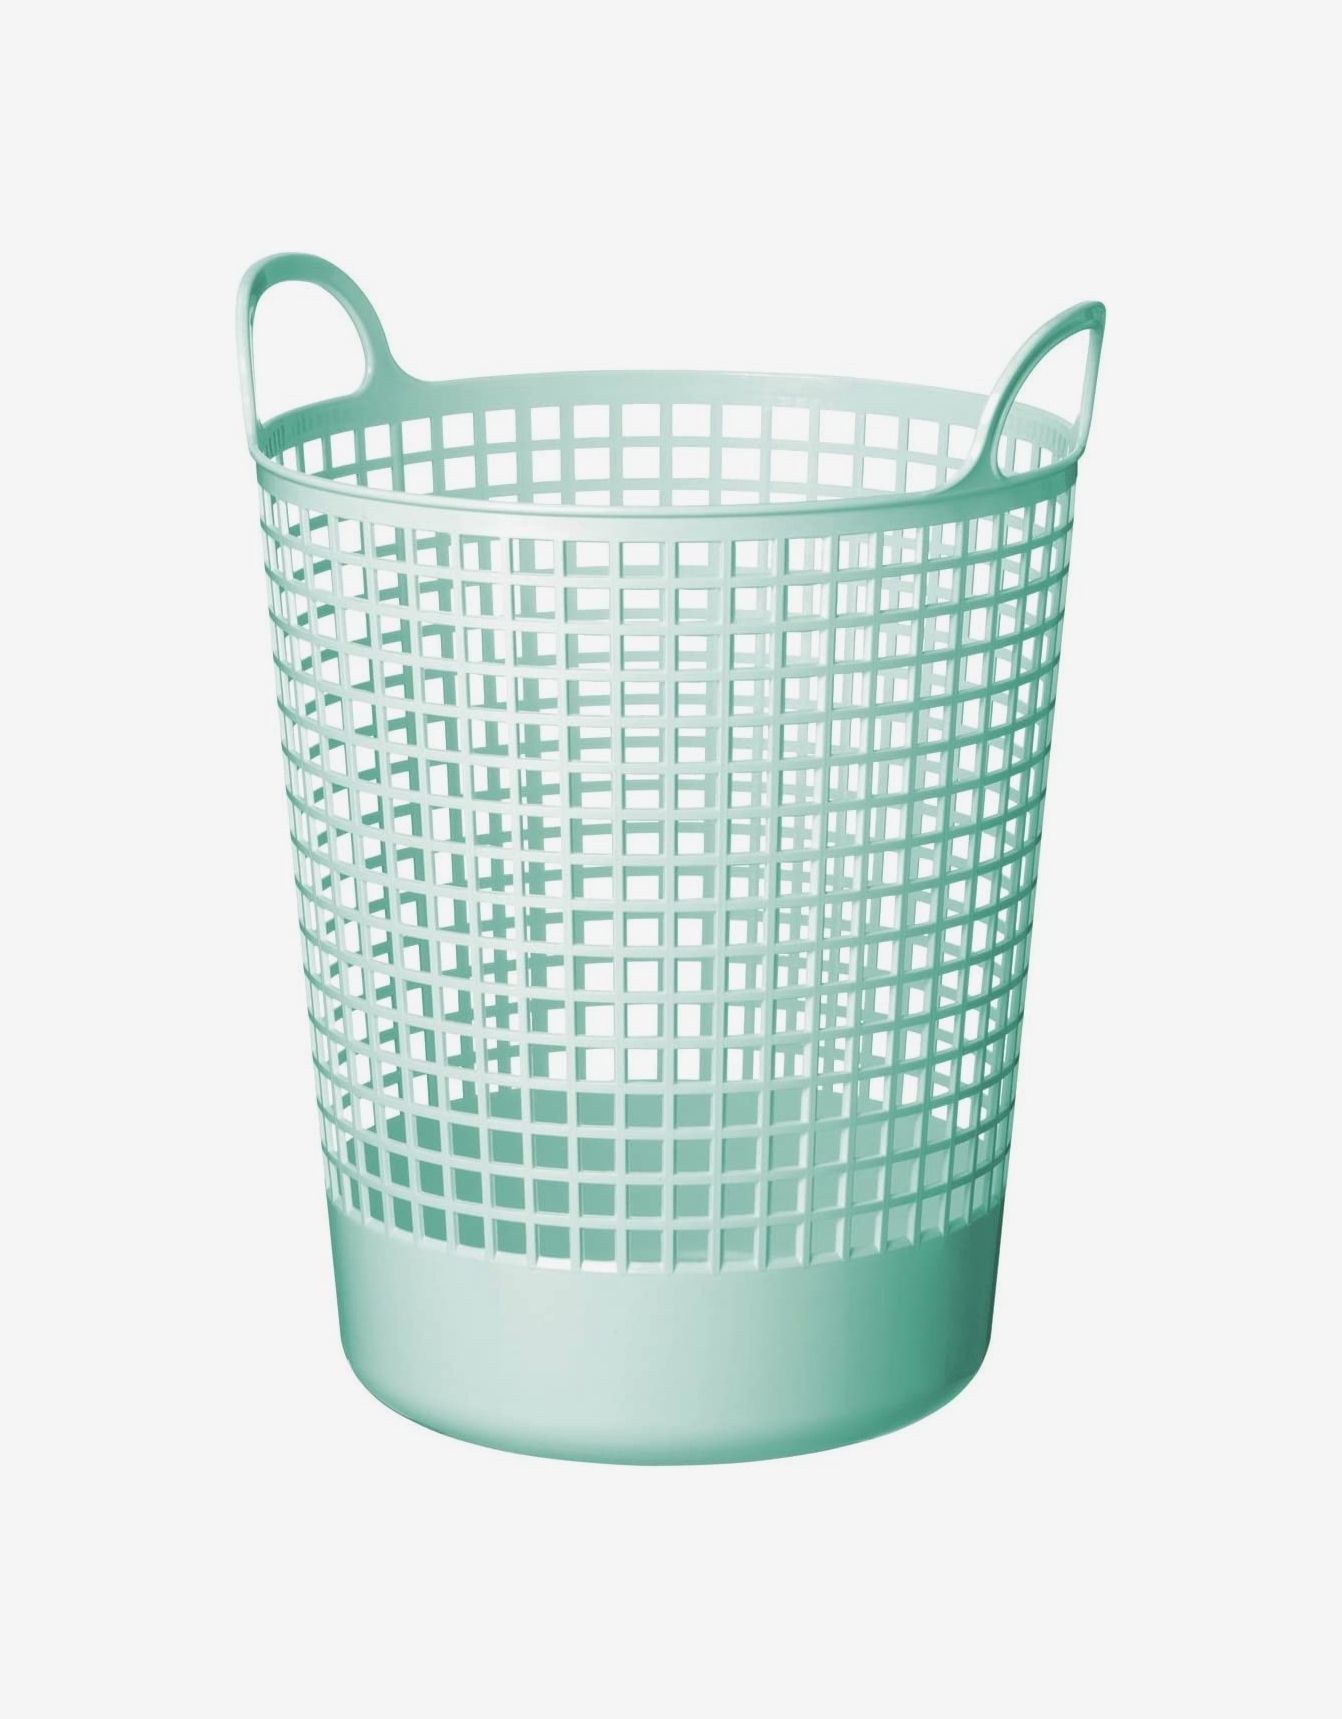 Title Shoe Cleaning Services - Innovative Laundry Basket